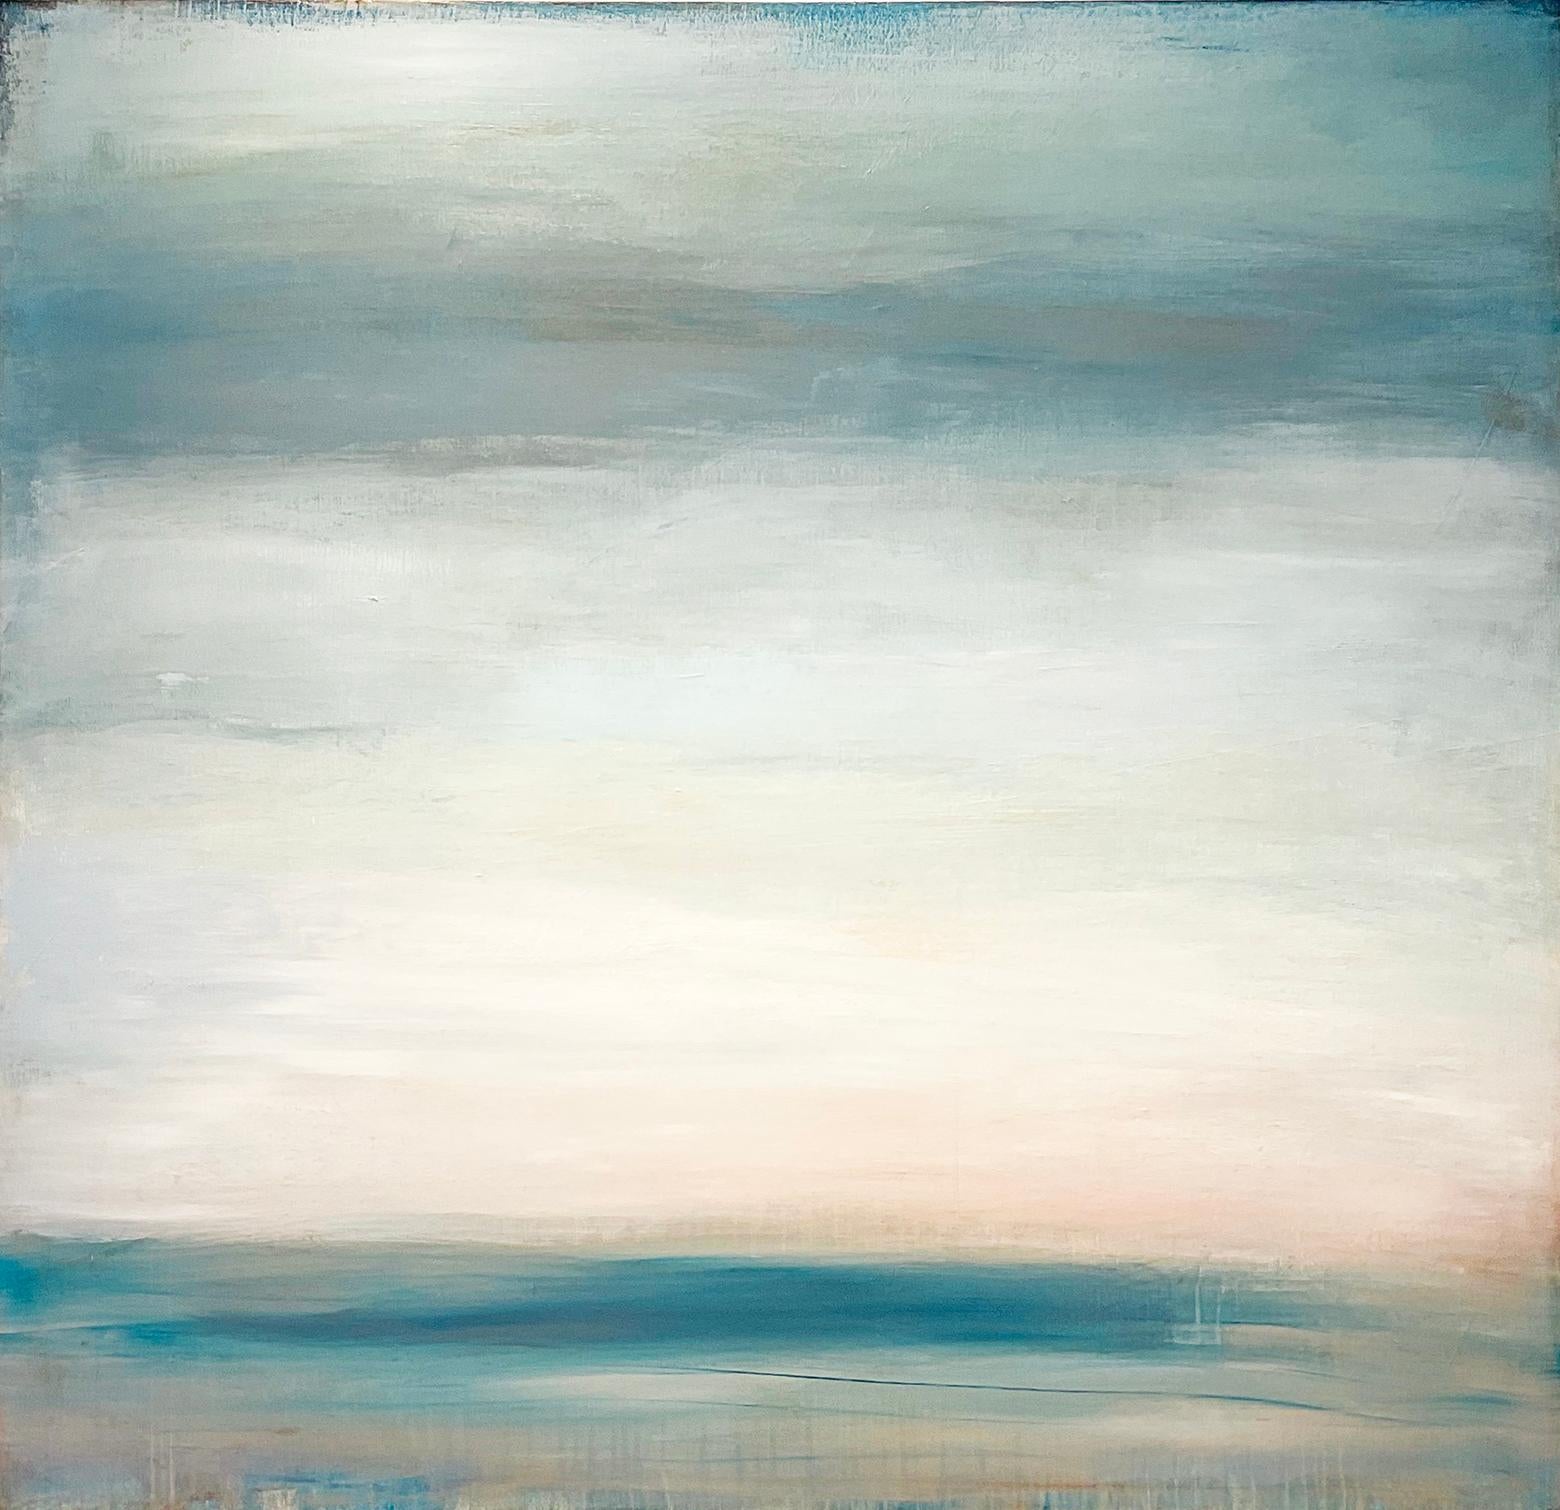 Shawn Dulaney Landscape Painting - Empathy: Abstract Color Field Painting in Shades of Blue, Aqua, Teal 